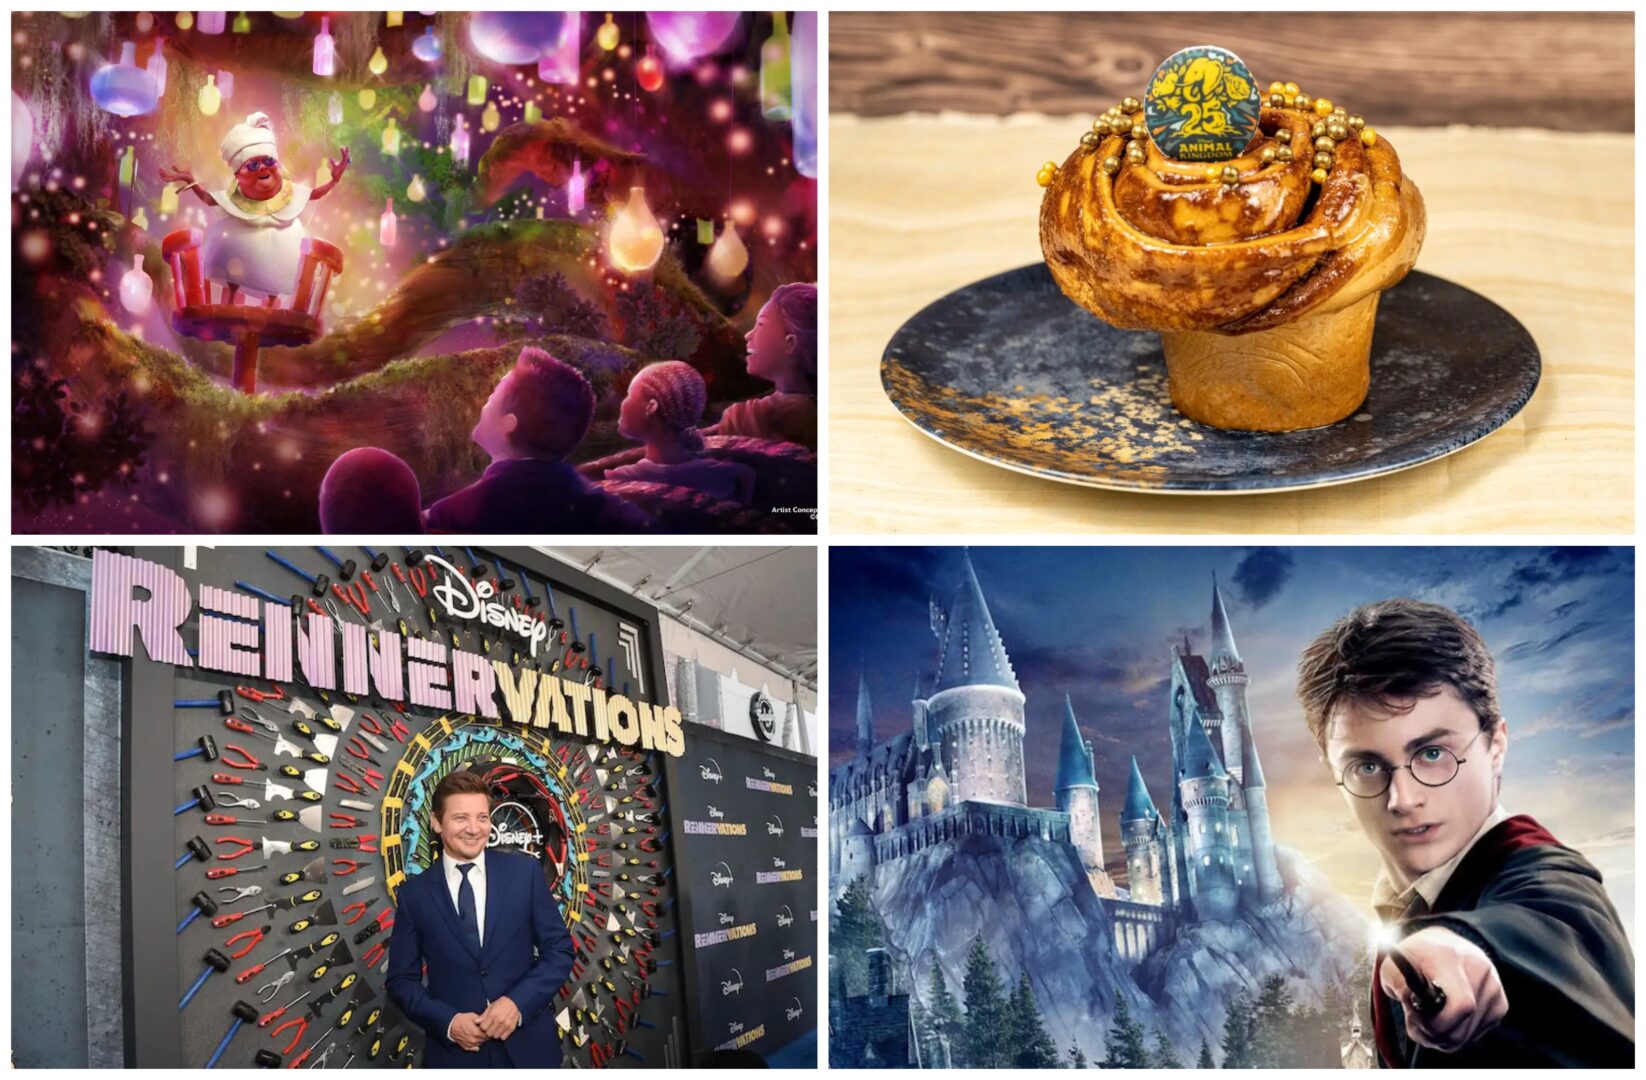 Disney News Highlight: Epcot Food and Wine Festival Announced, Disneyland Splash Mountain Closing Date, New Harry Potter Series on MAX, Earth Day at Animal Kingdom